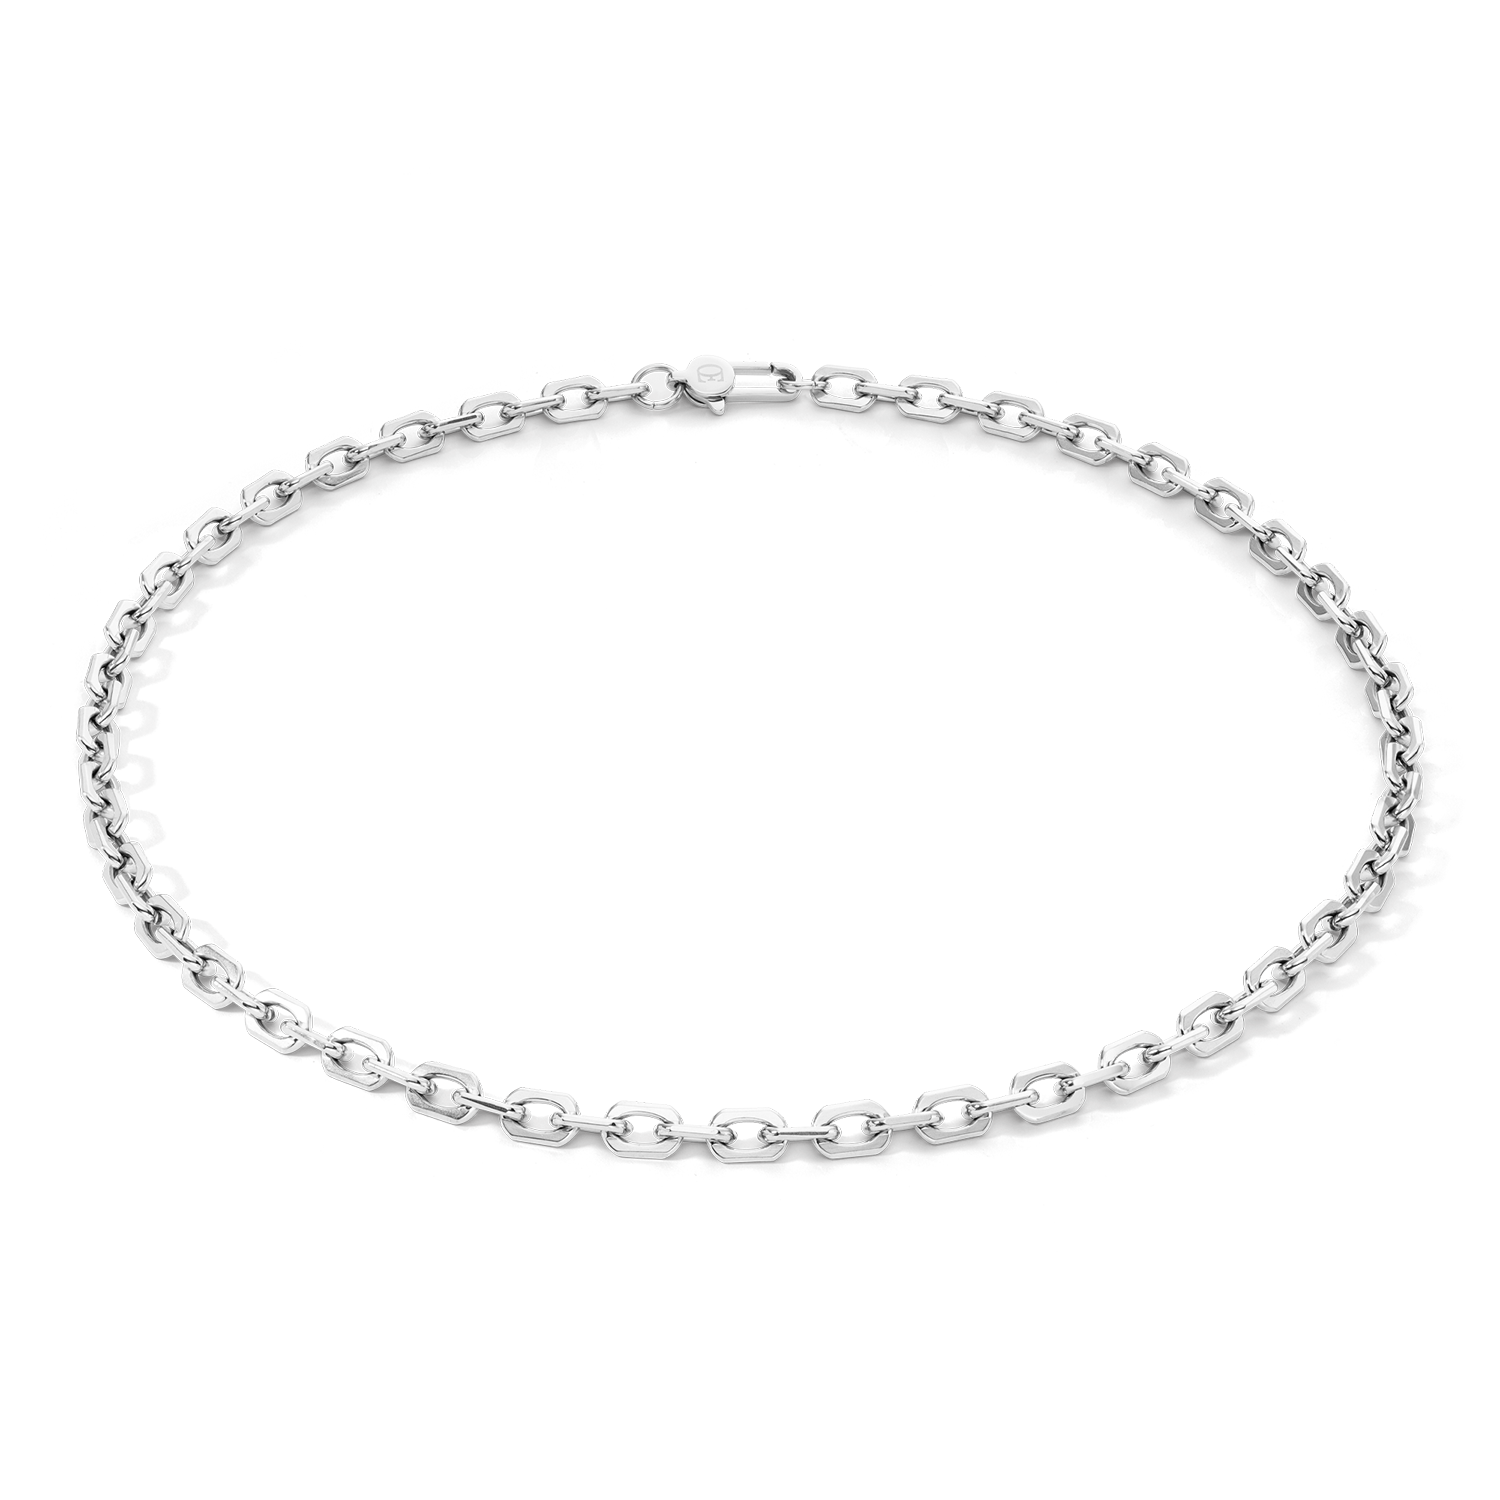 Necklace link chain silver